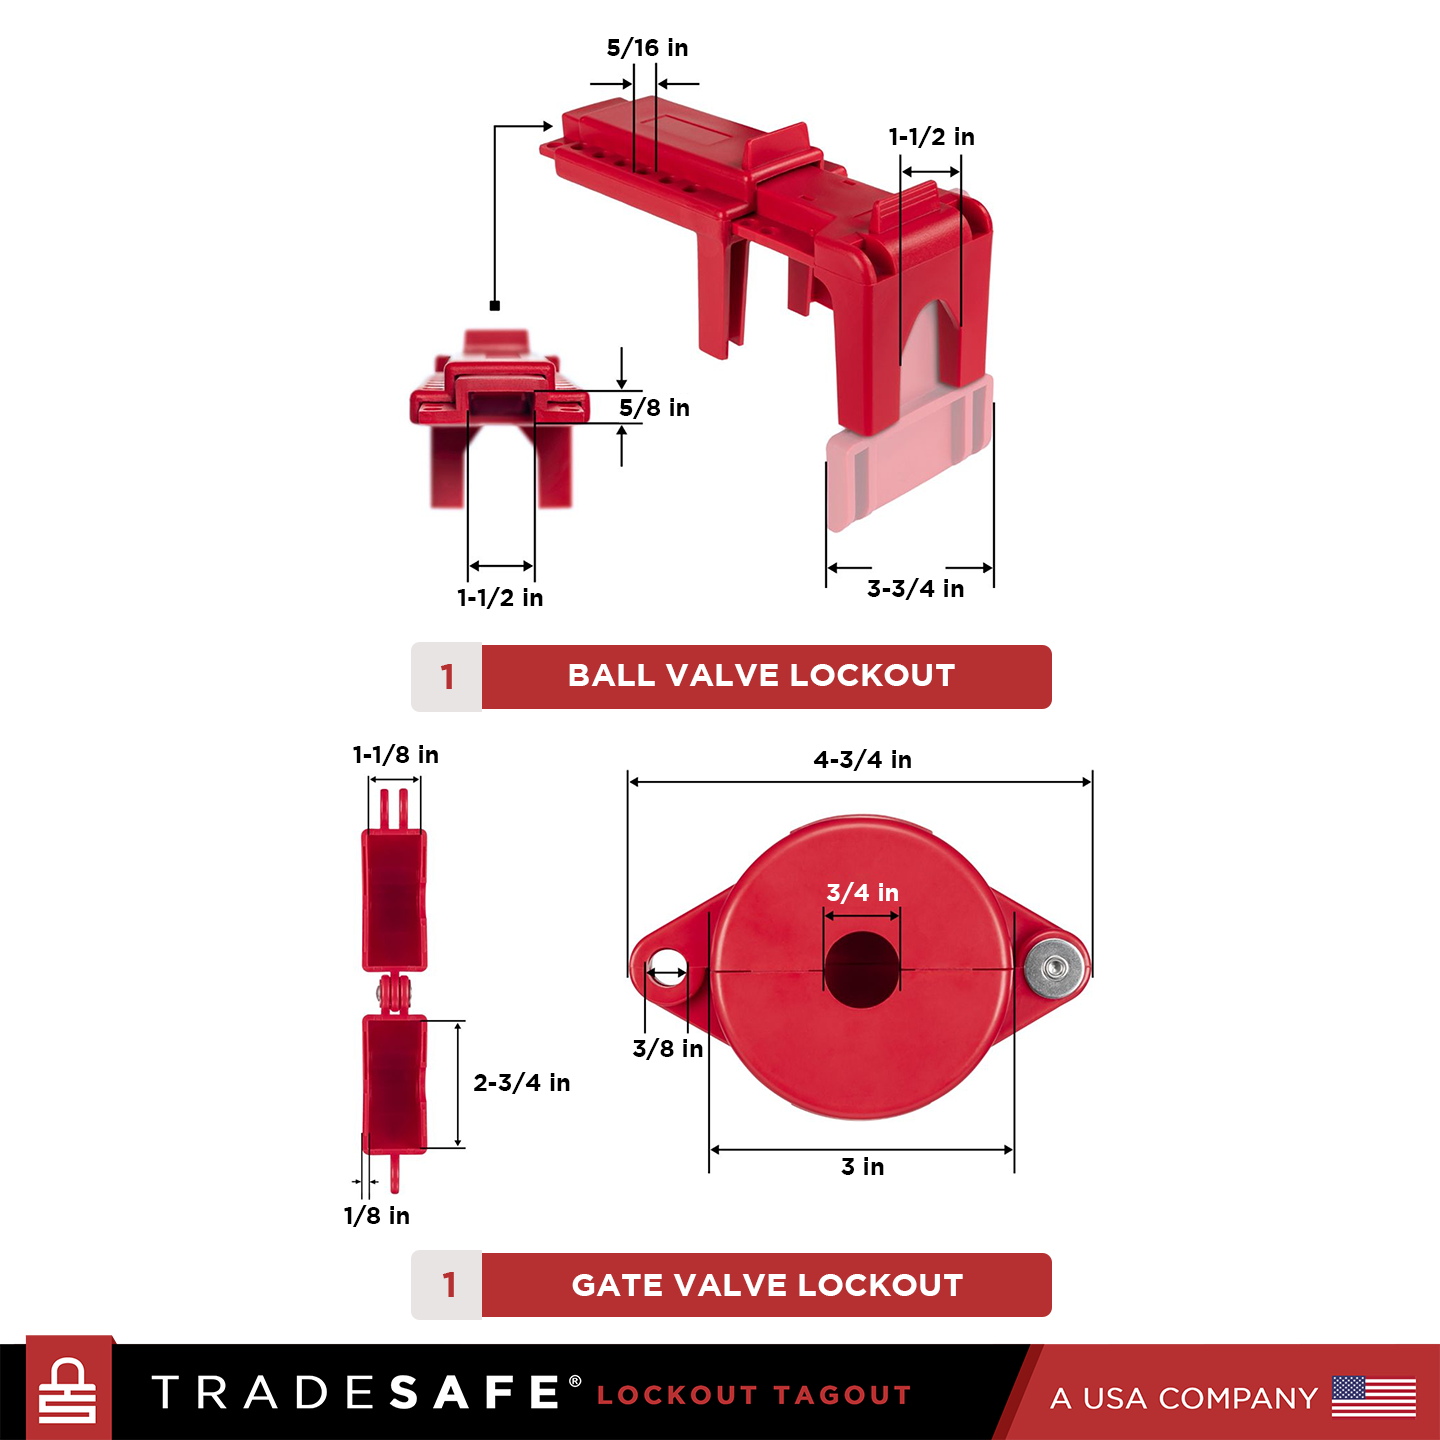 1 ball valve lockout and 1 gate valve lockout showing the products dimensions